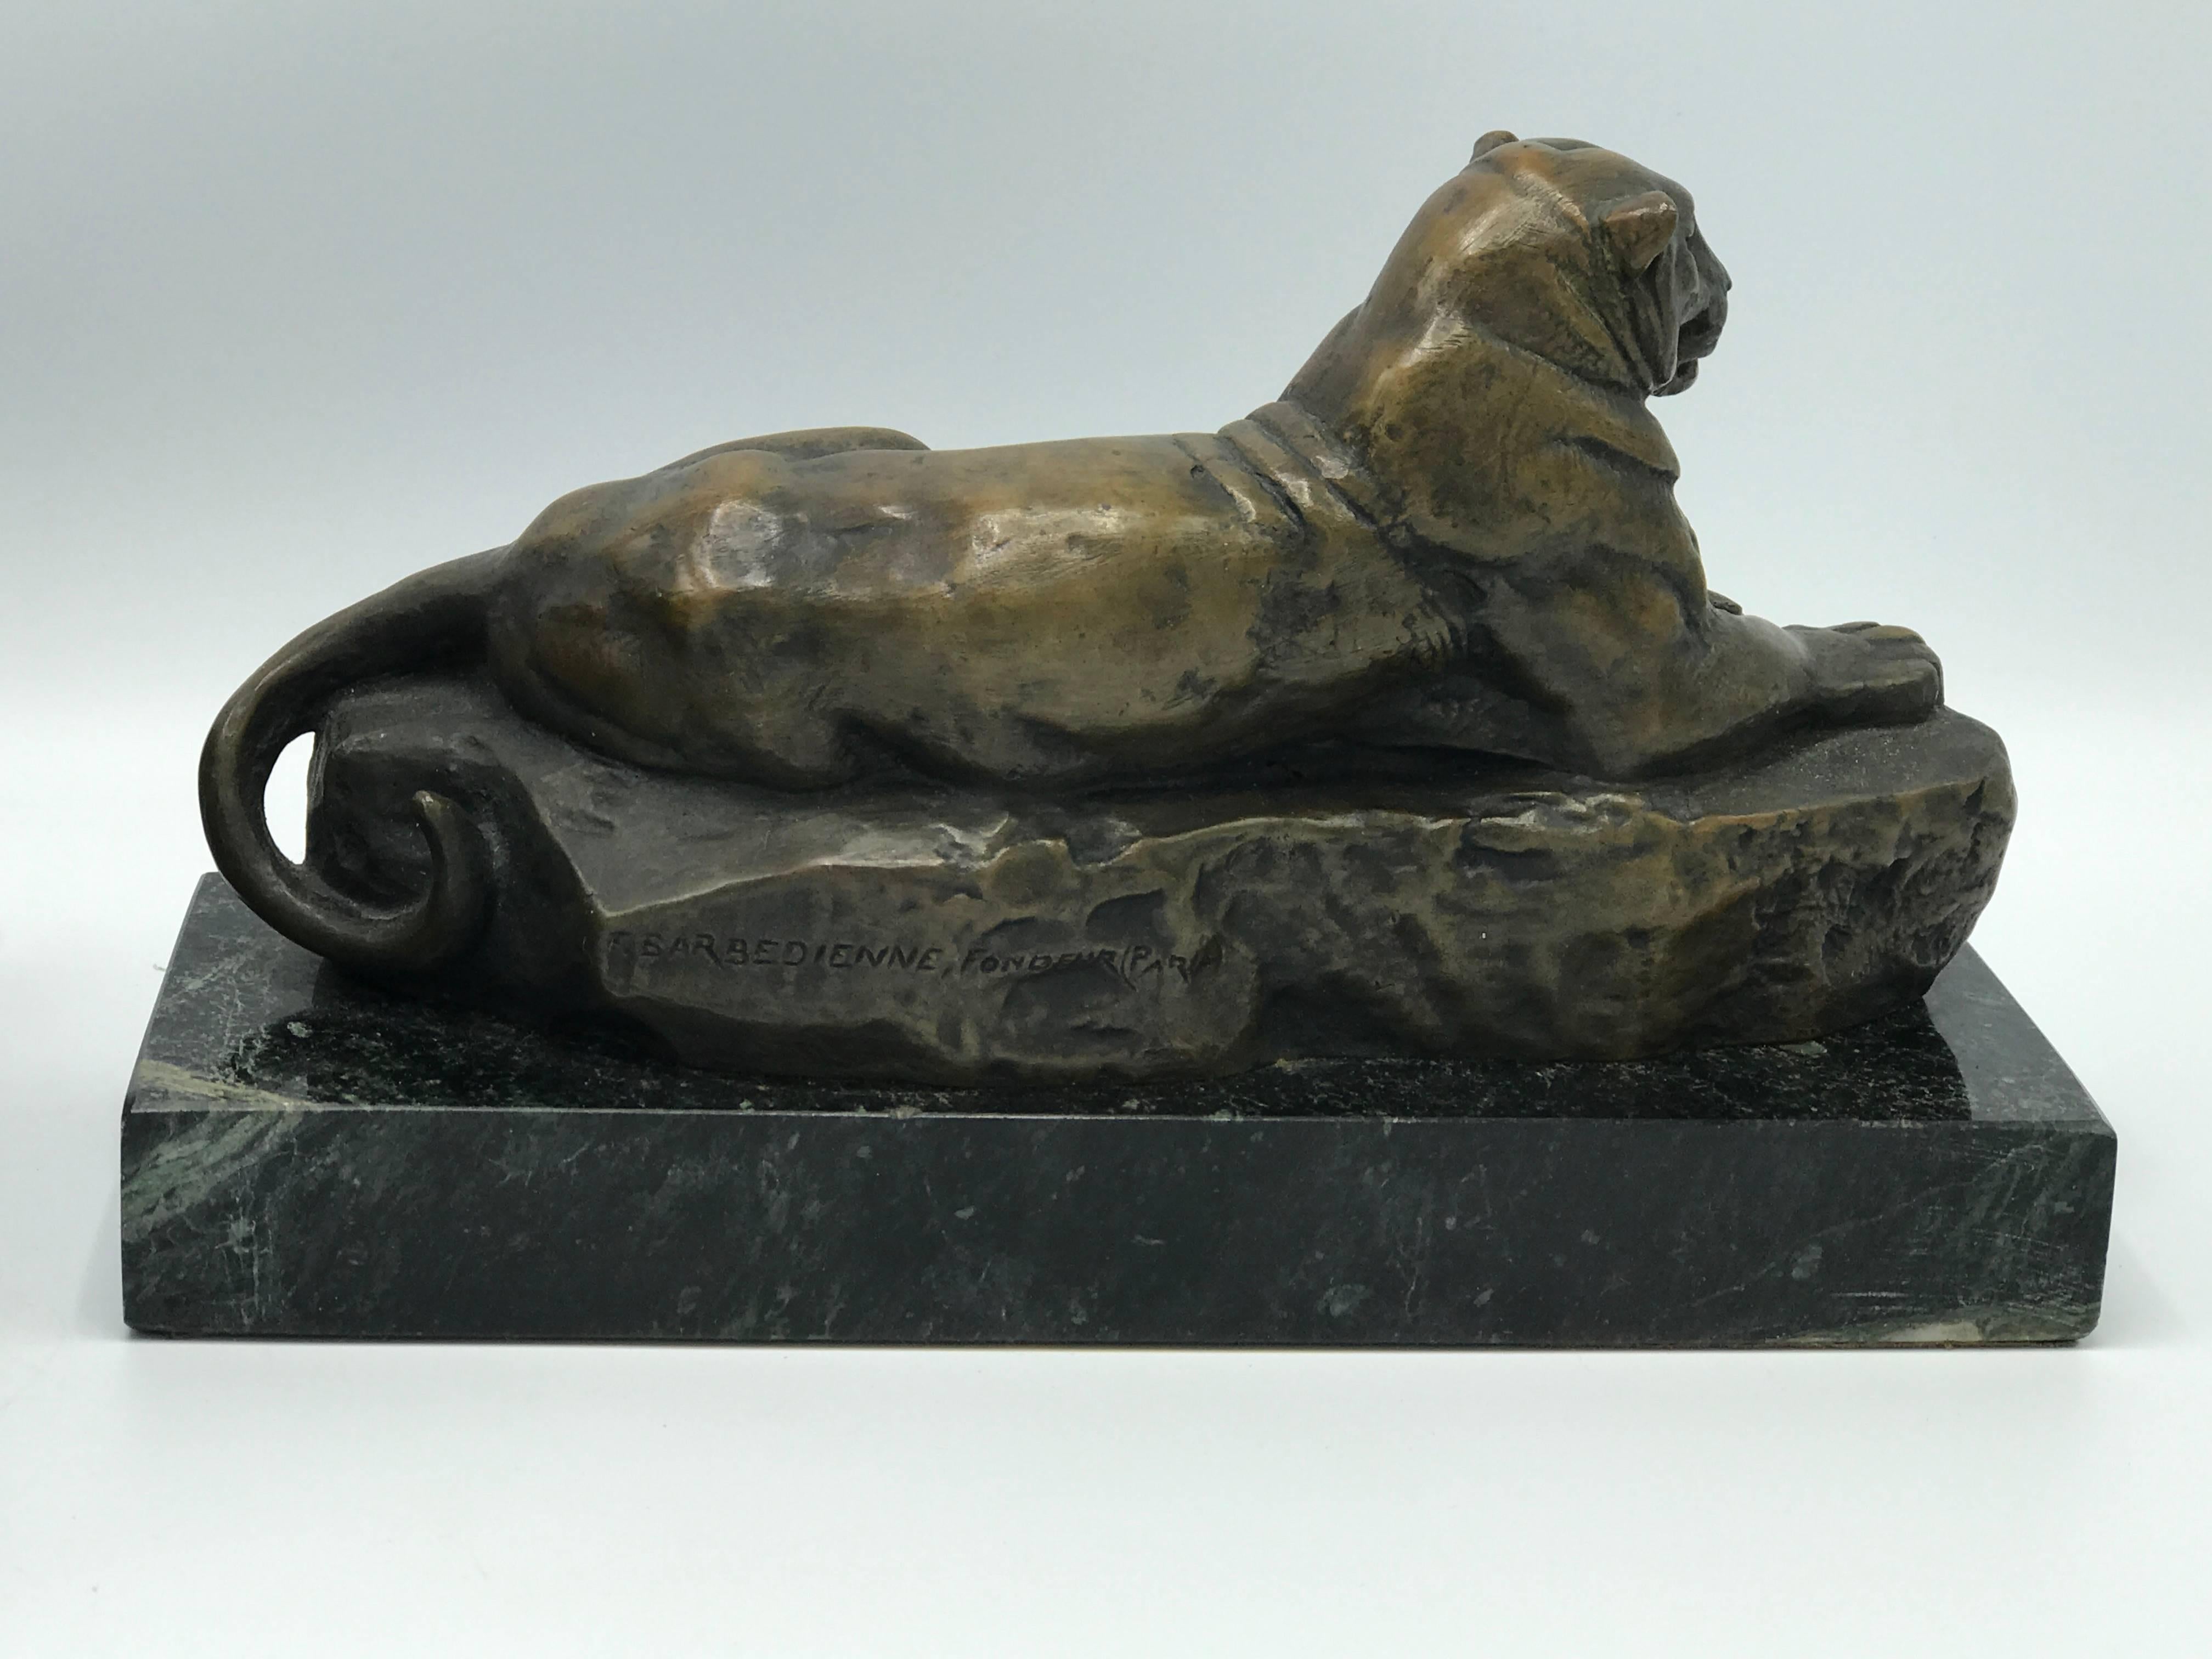 Offered is an immaculate, pair of 1920s, French Art Deco solid-bronze panther bookends. Signed 'Barye' (French Sculptor, Antoine-Louis Barye). Each rest upon black marble bases. Substantial weight. Highly exclusive and rare pieces in outstanding